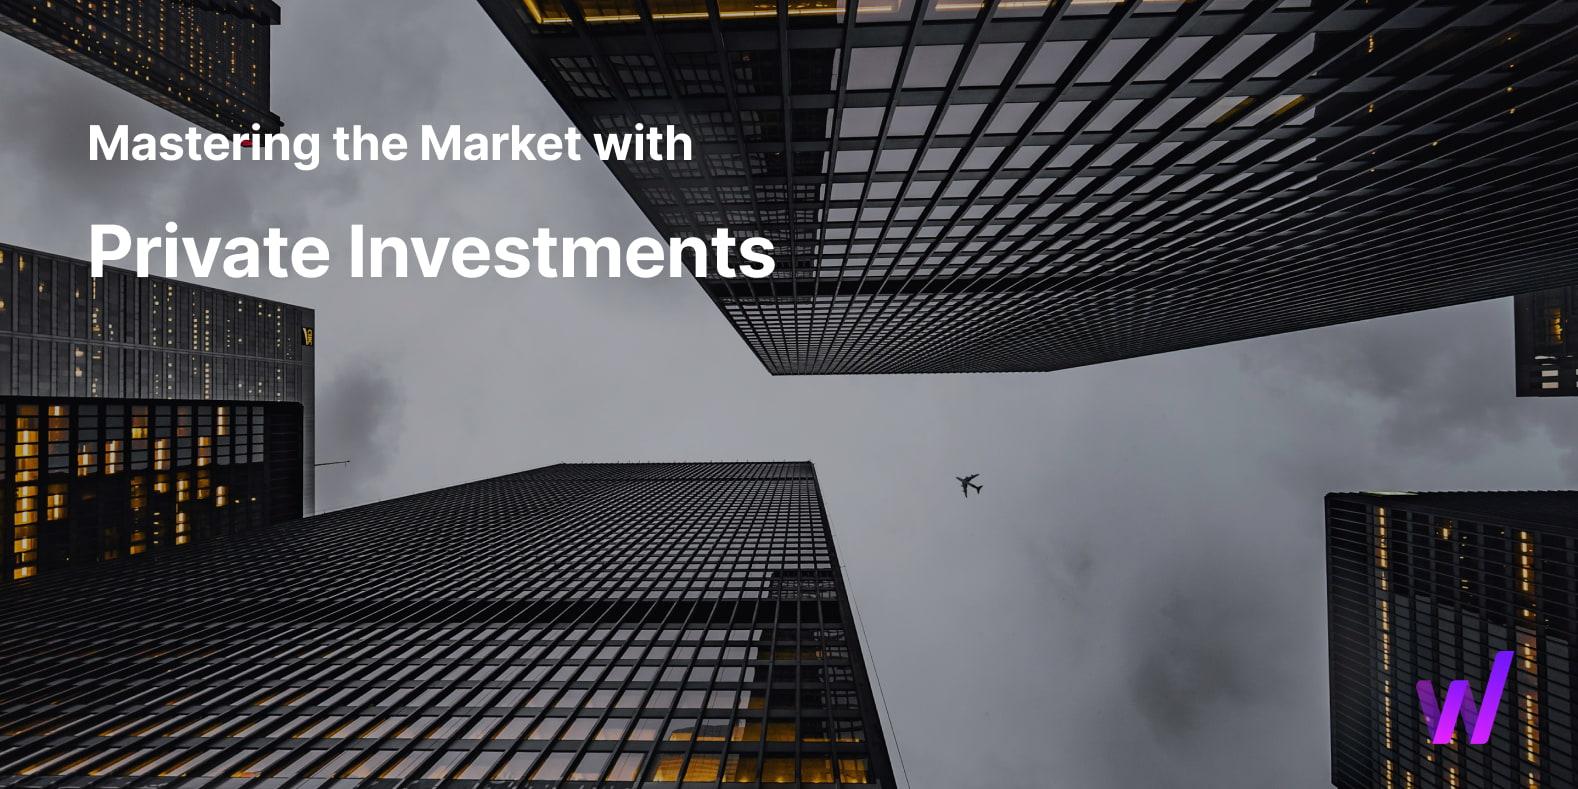 Mastering the Market with Private Investments on the high buildings picture